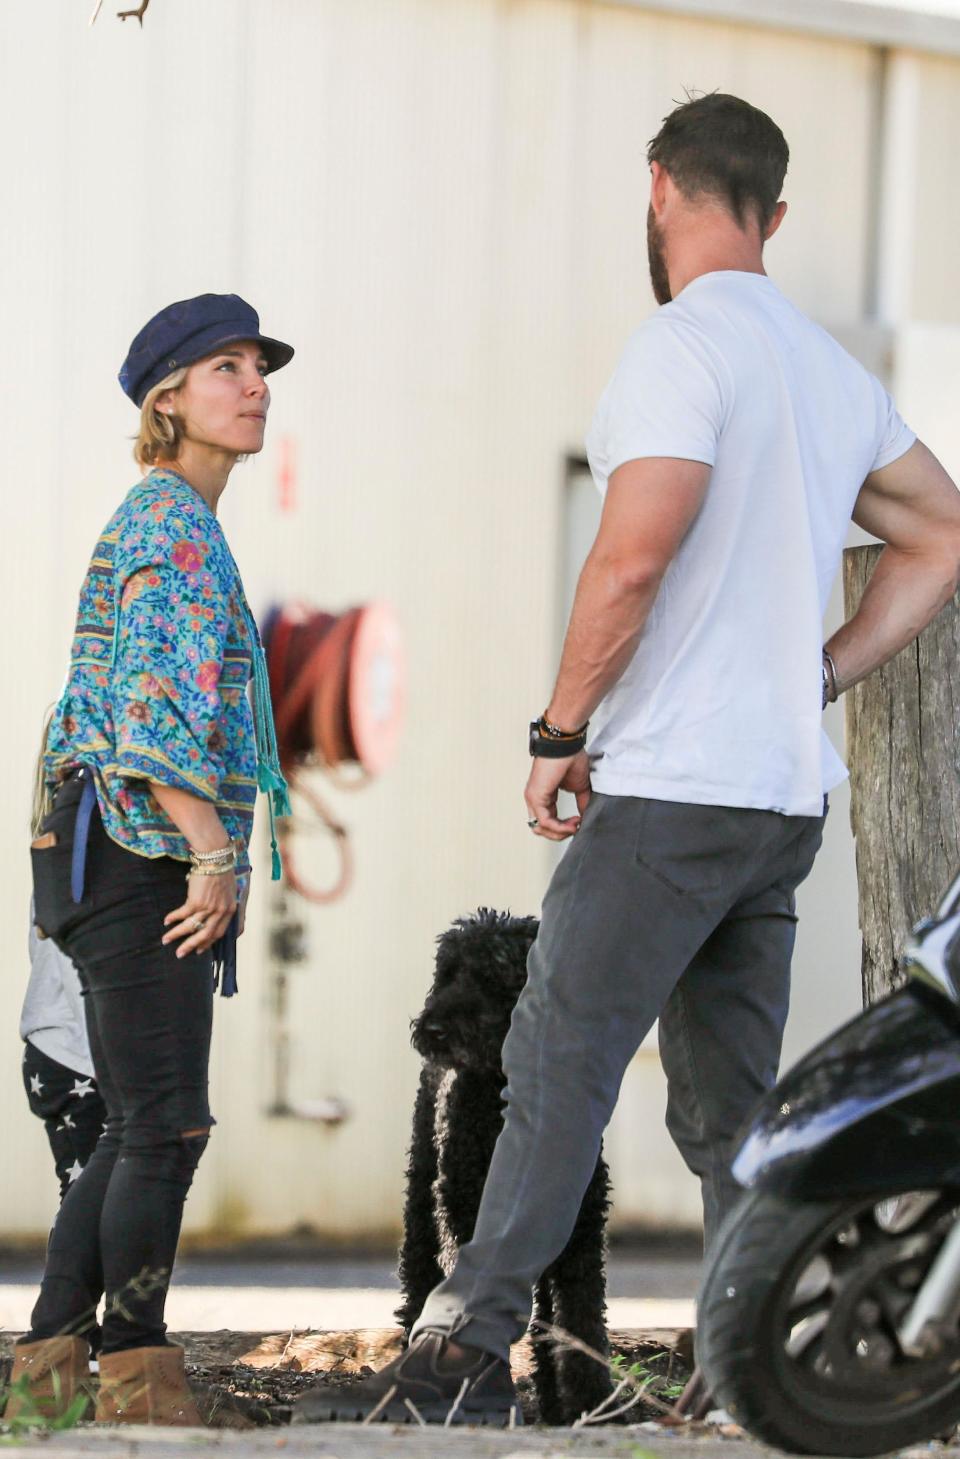 The Spanish model channelled a boho-chic look while Chris looked casual in a white t-shirt and grey jeans.